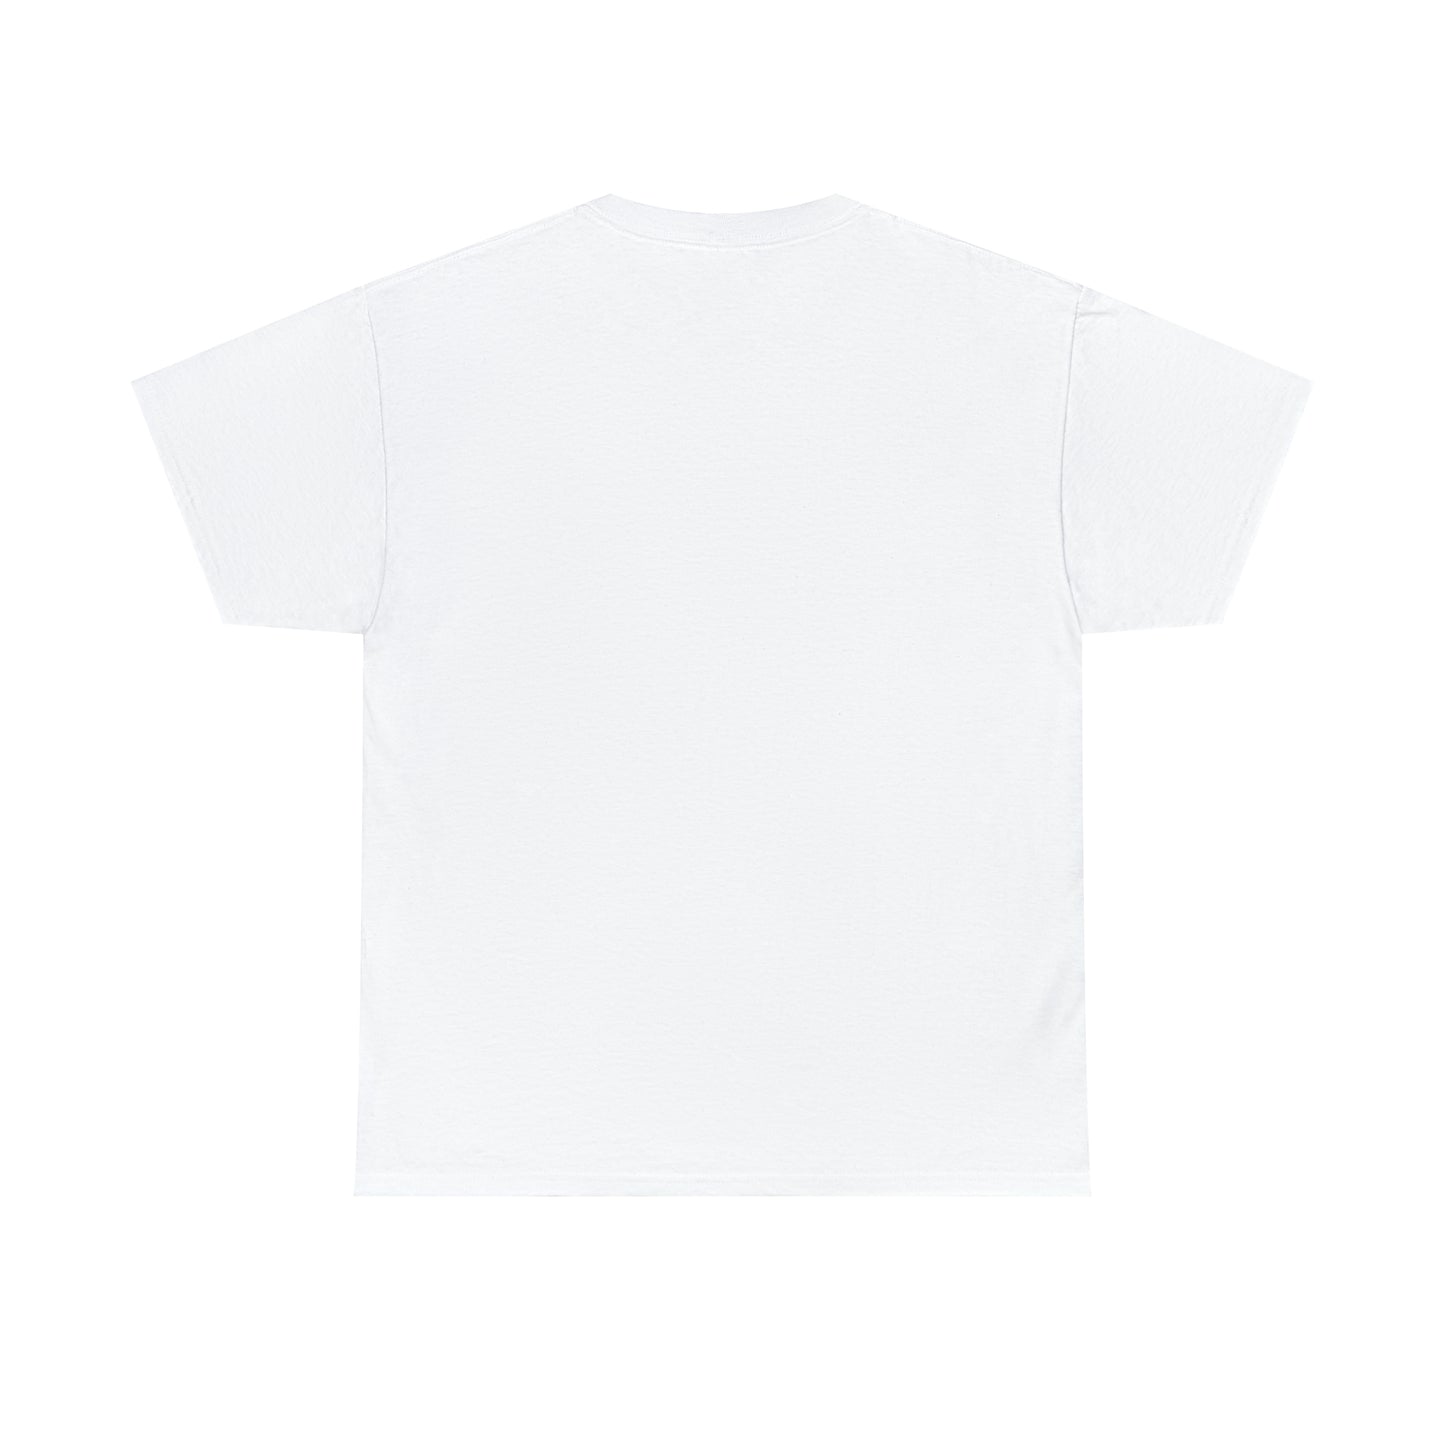 Healthful t-shirt and moderate lifestyle item